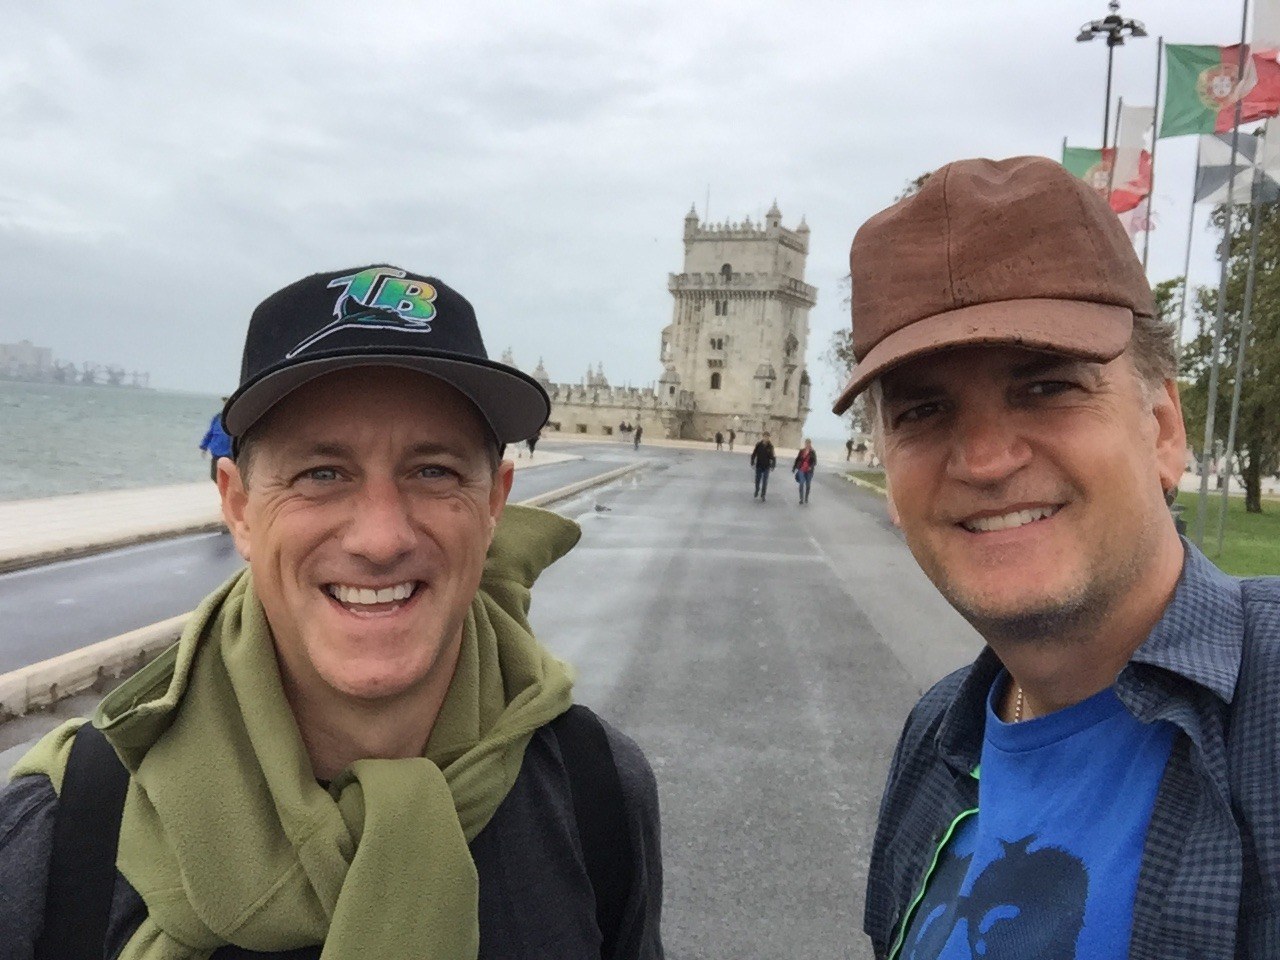 Mike and Drew with hats in Lisbon